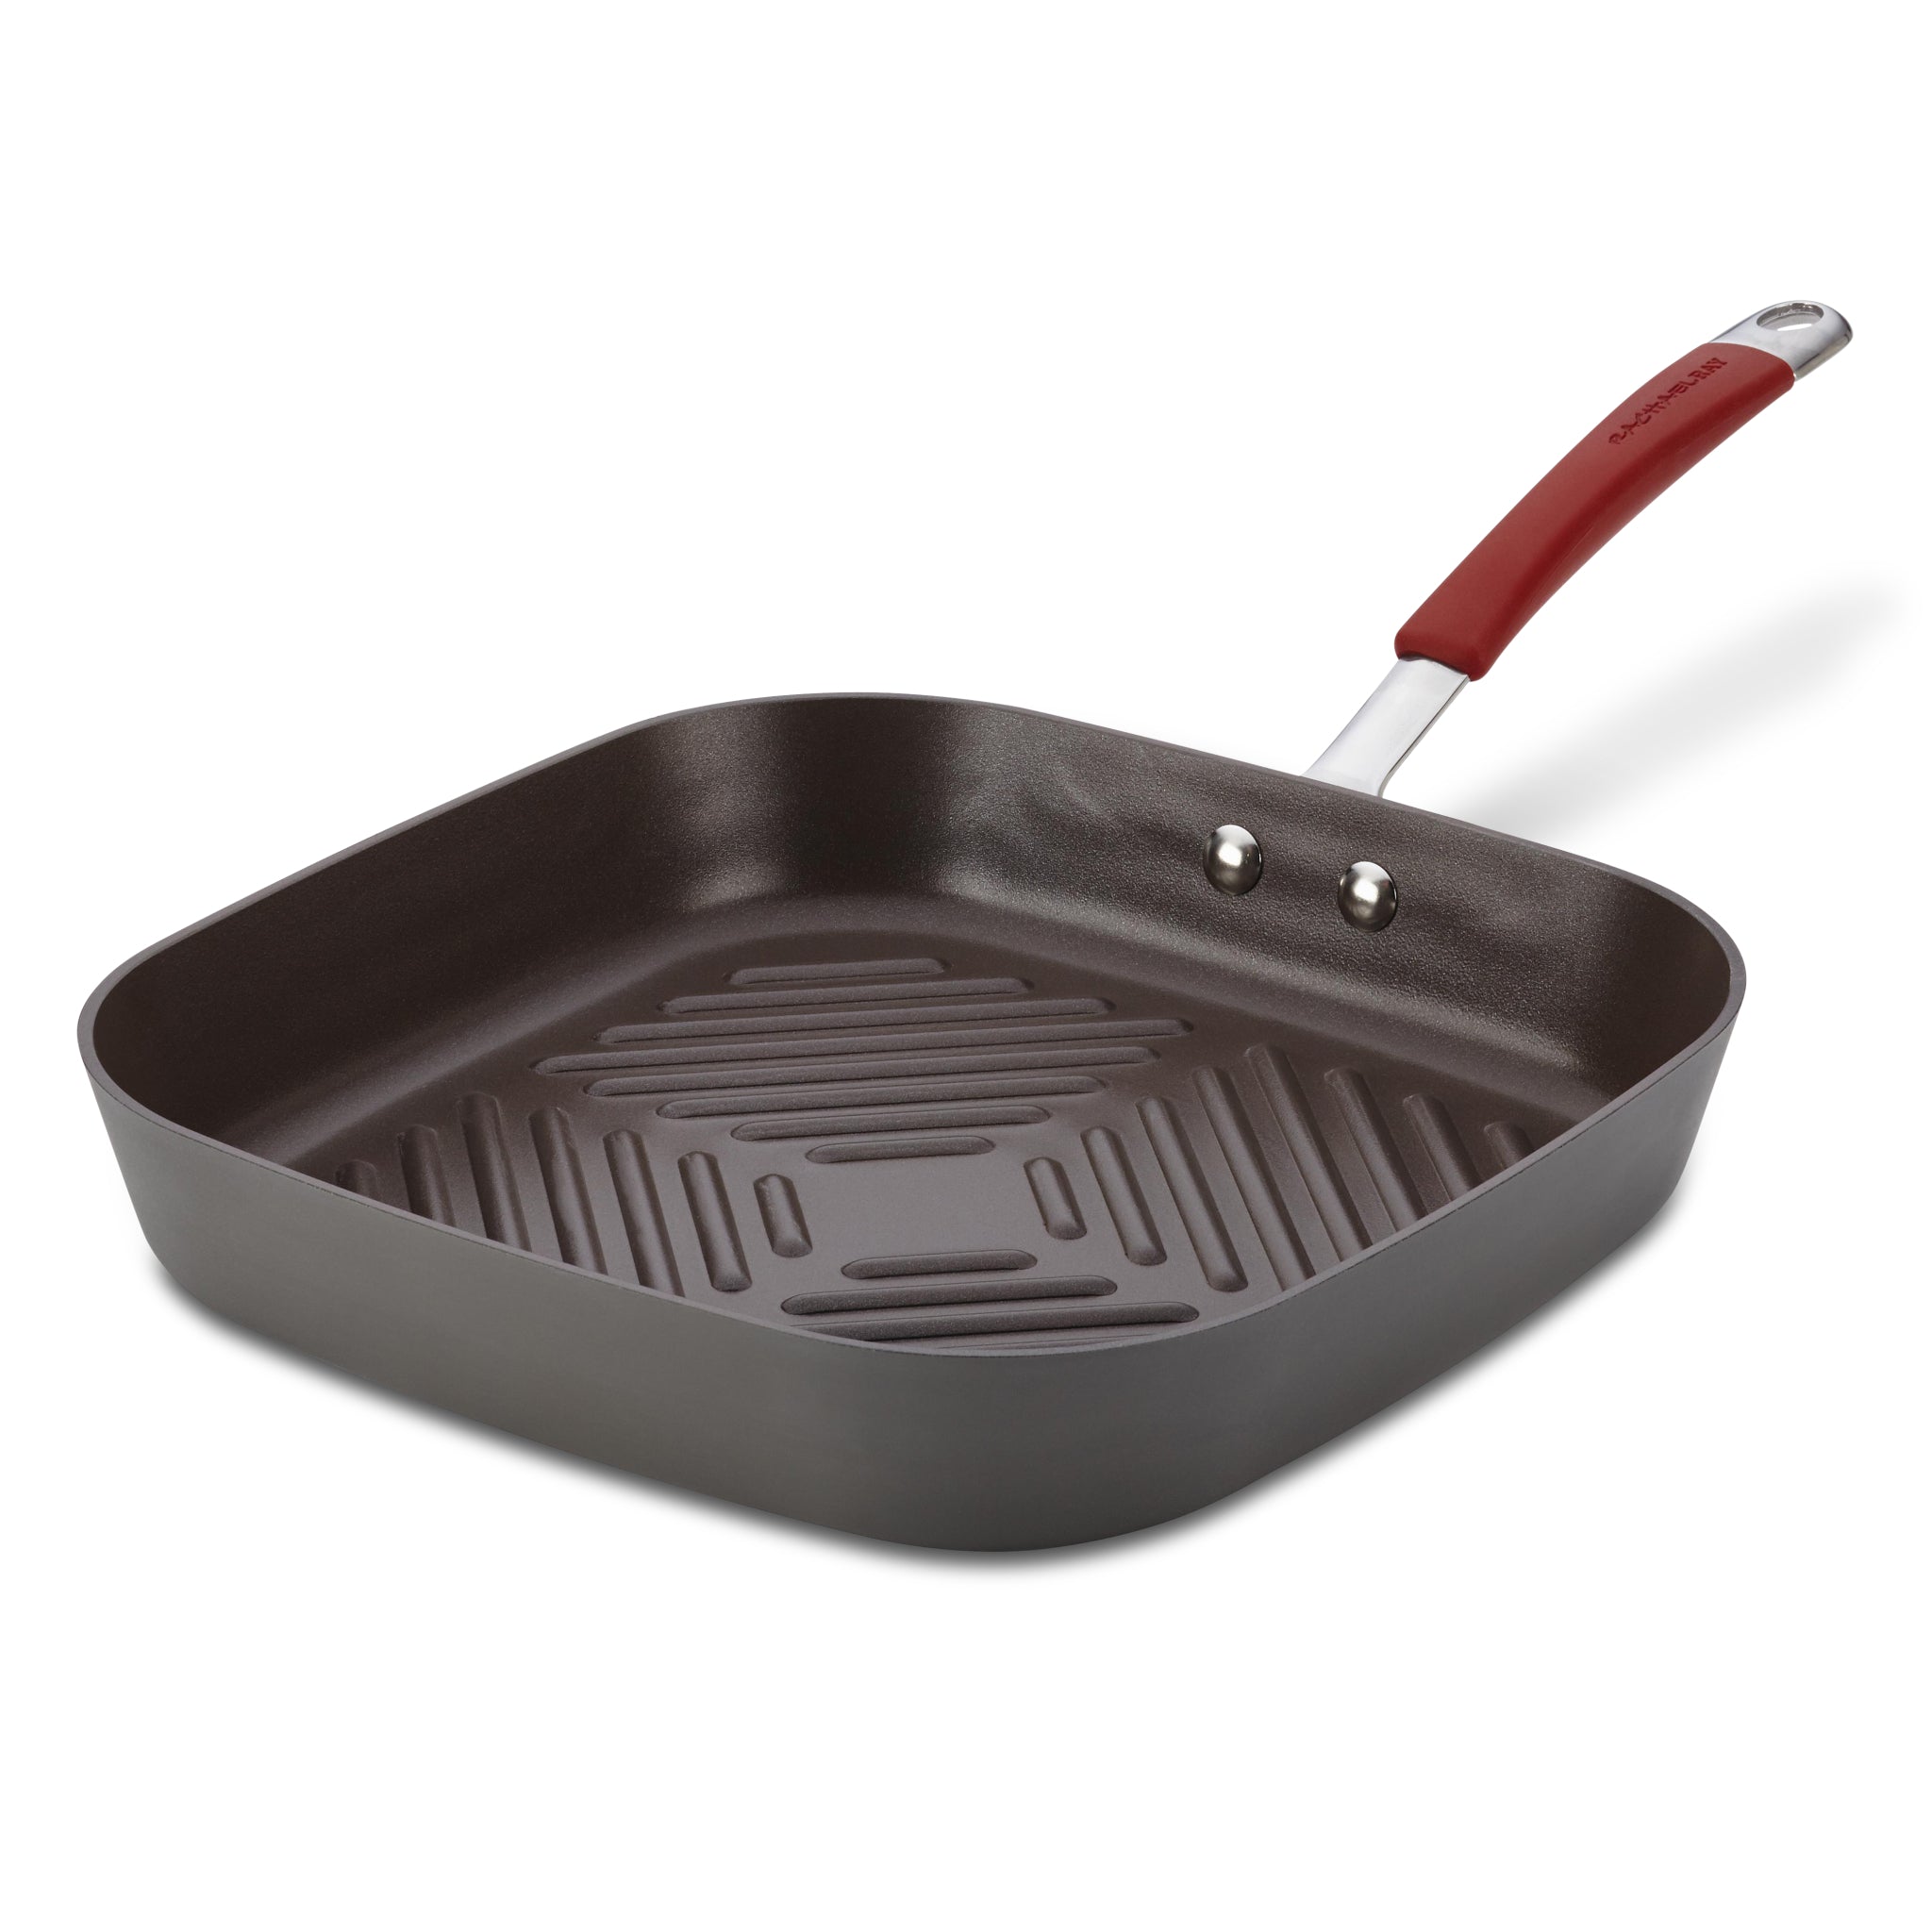 Rachael Ray 11-inch Nonstick Square Griddle Pan, Aluminum, Gray, Cook + Create Collection